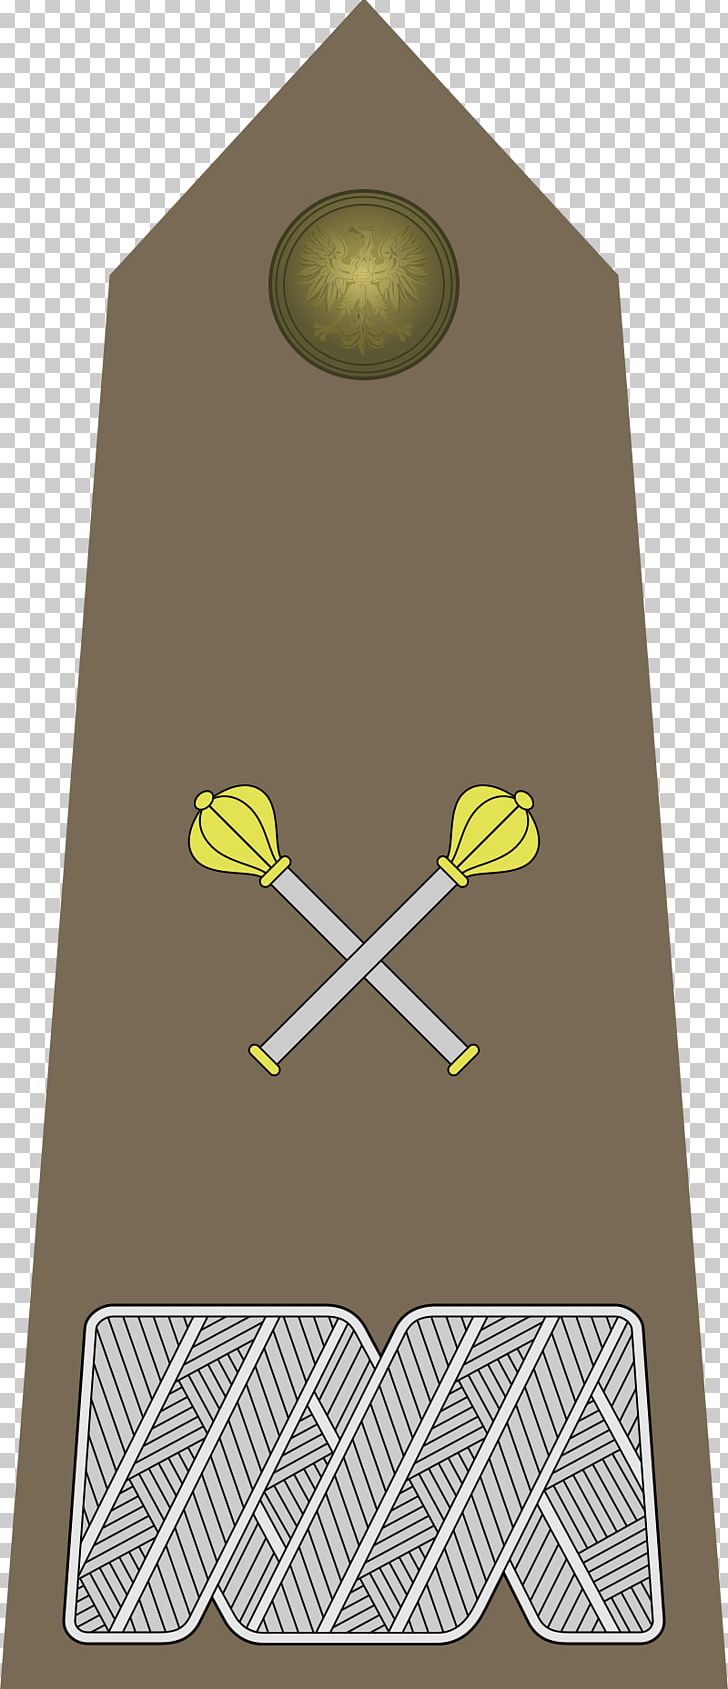 Marshal Of Poland Polish Armed Forces Rank Insignia General Military Rank PNG, Clipart, Army, Drab, General, Grass, Green Free PNG Download